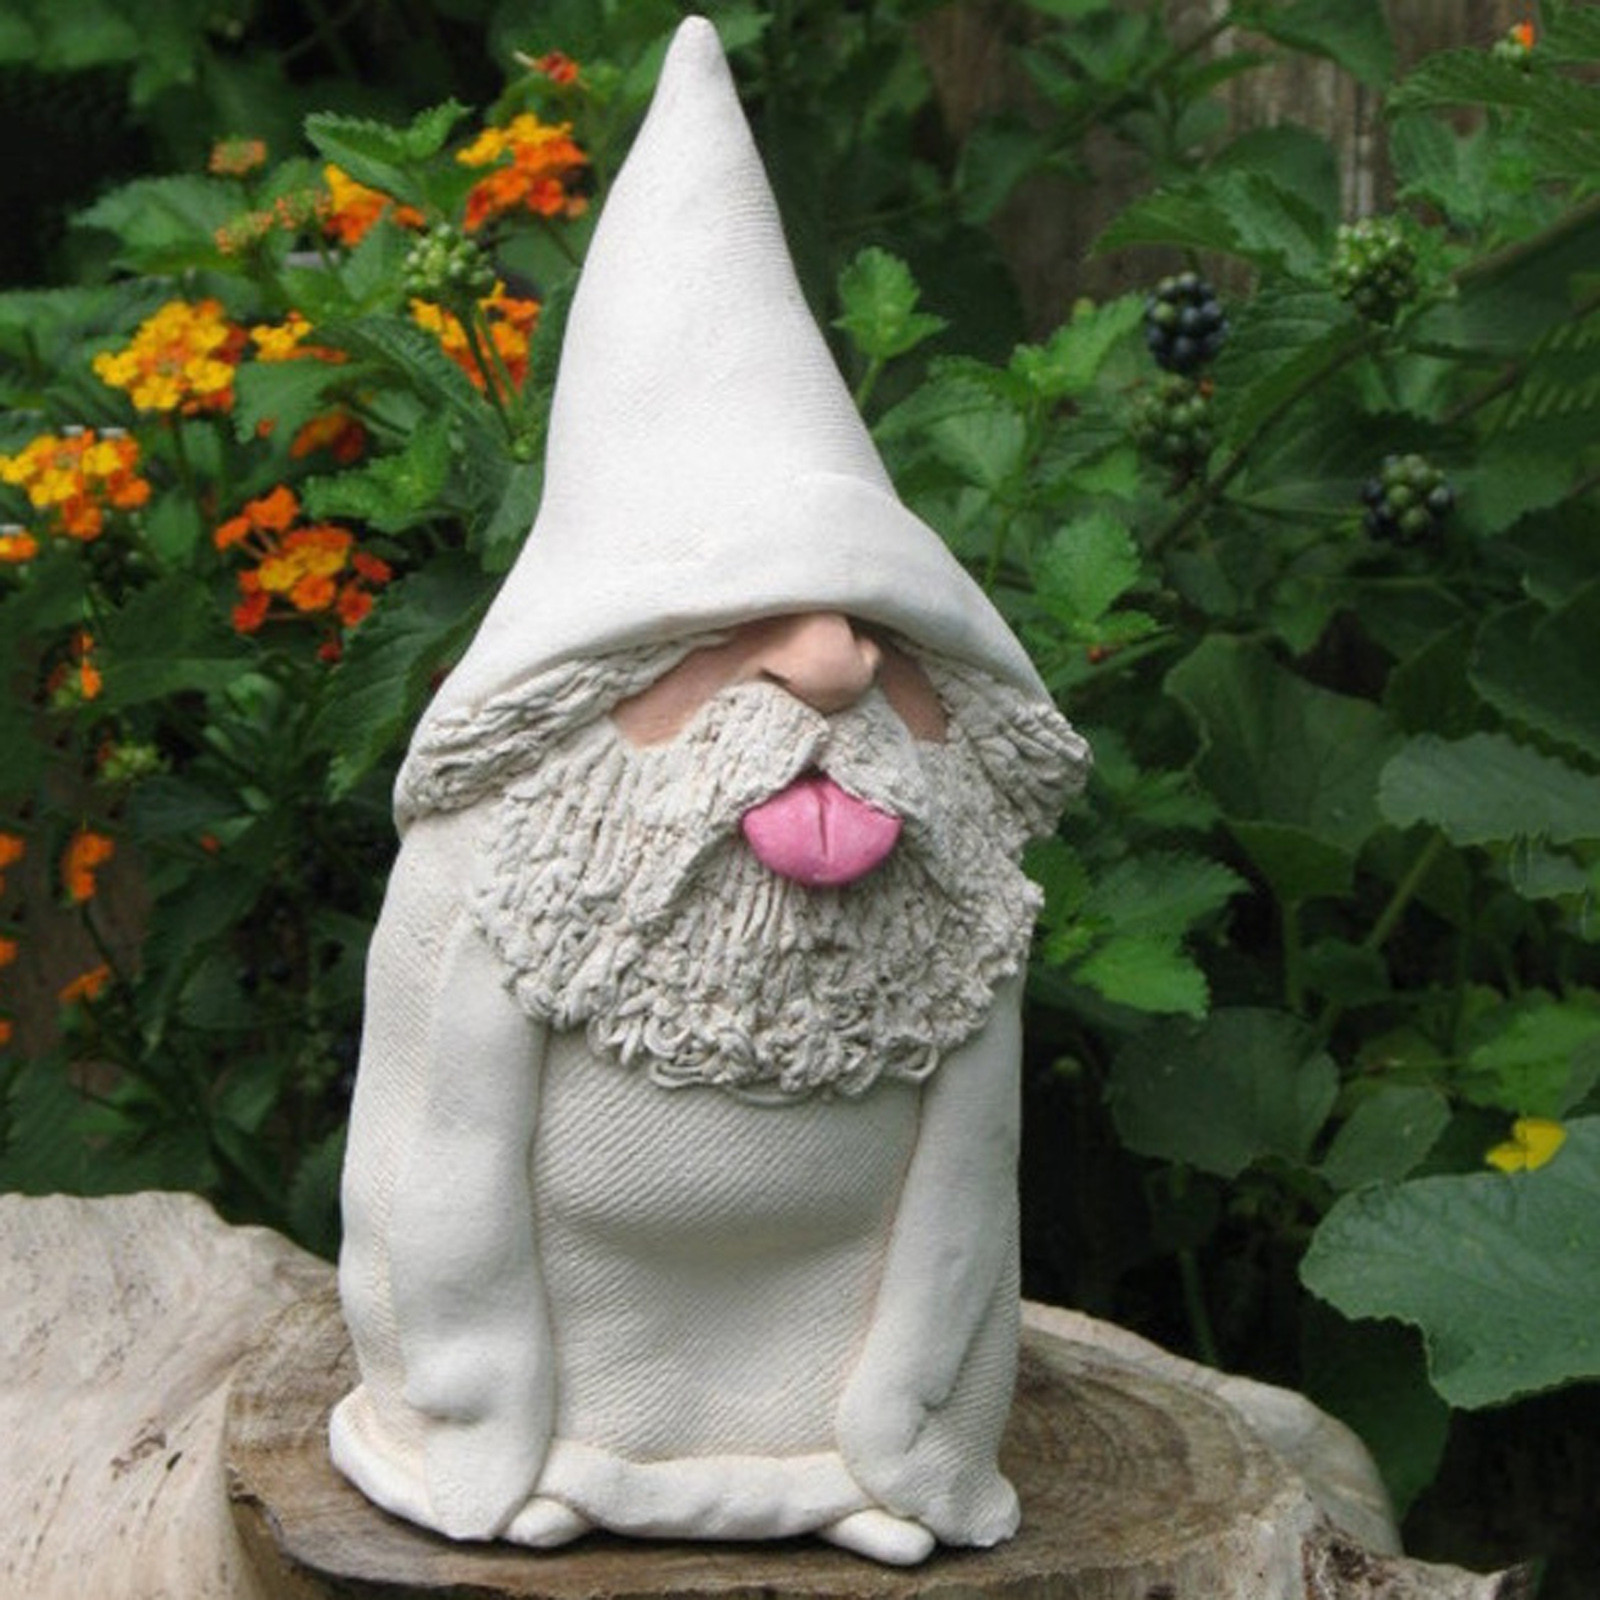 Womail Garden Supplies 1PC Tongue Gnome Naughty Garden Gnome for Lawn  Ornaments Indoor Or Outdooor - Walmart.com